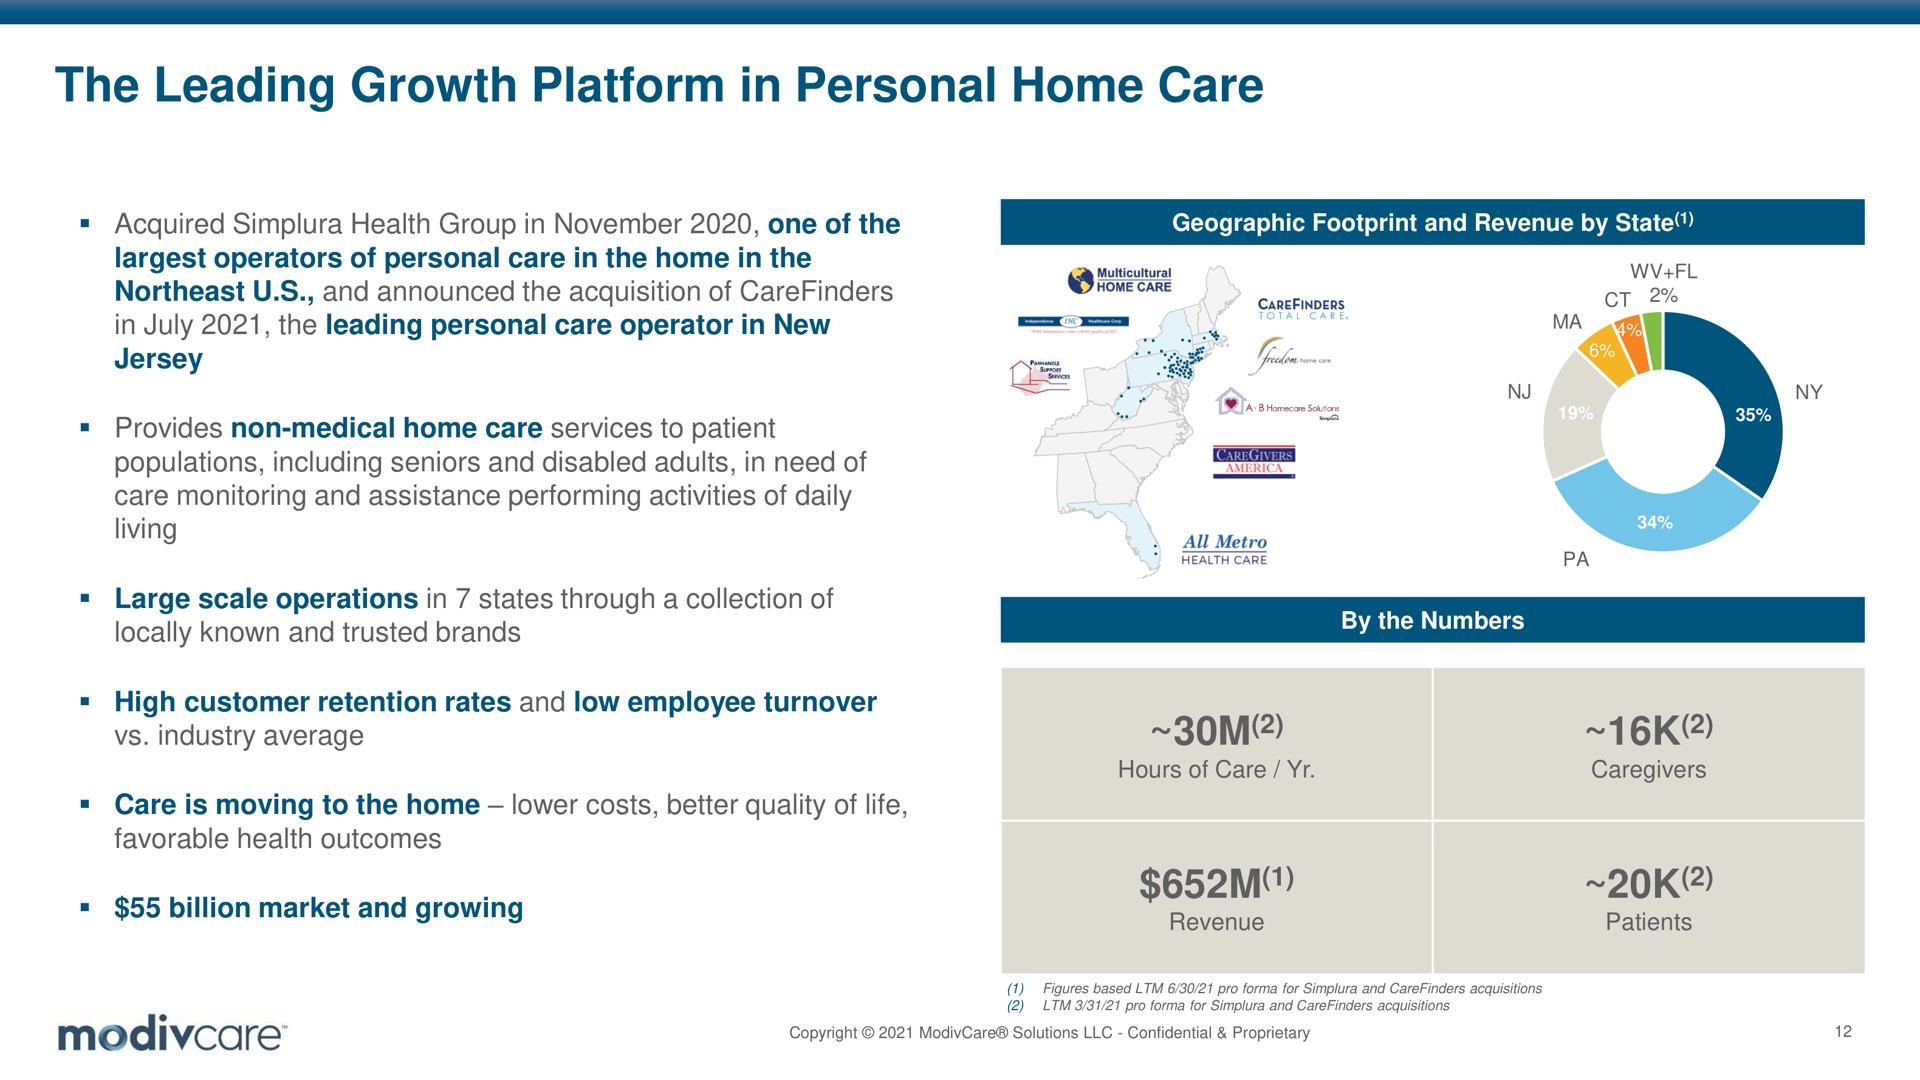 the leading growth platform in personal home care | ModivCare